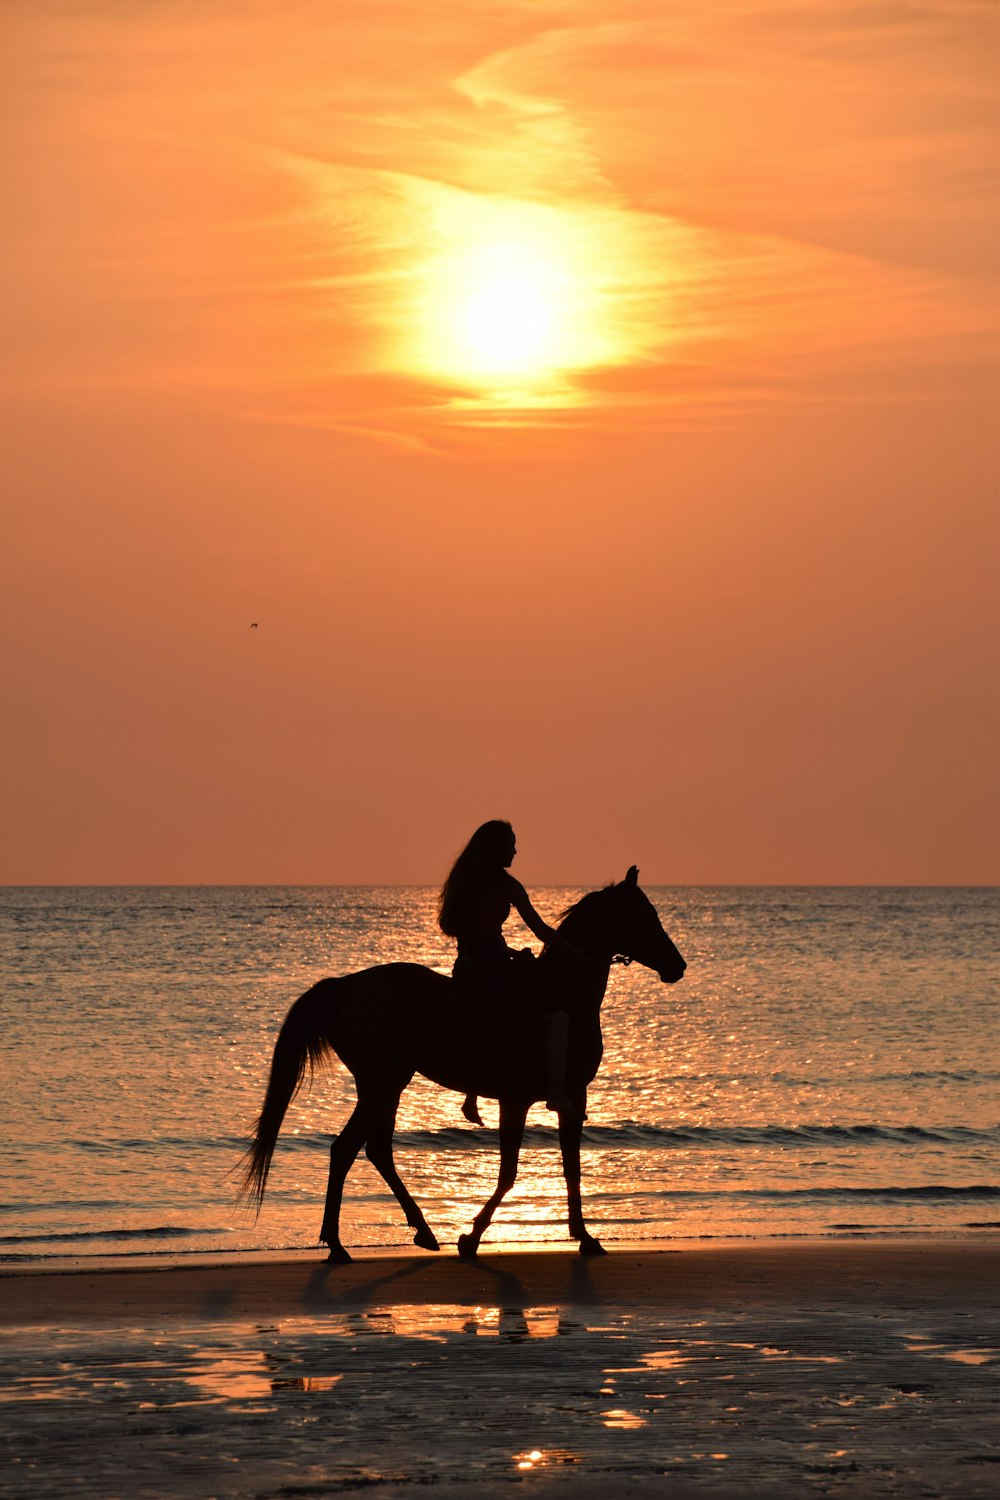 a woman riding a horse on the beach at sunset